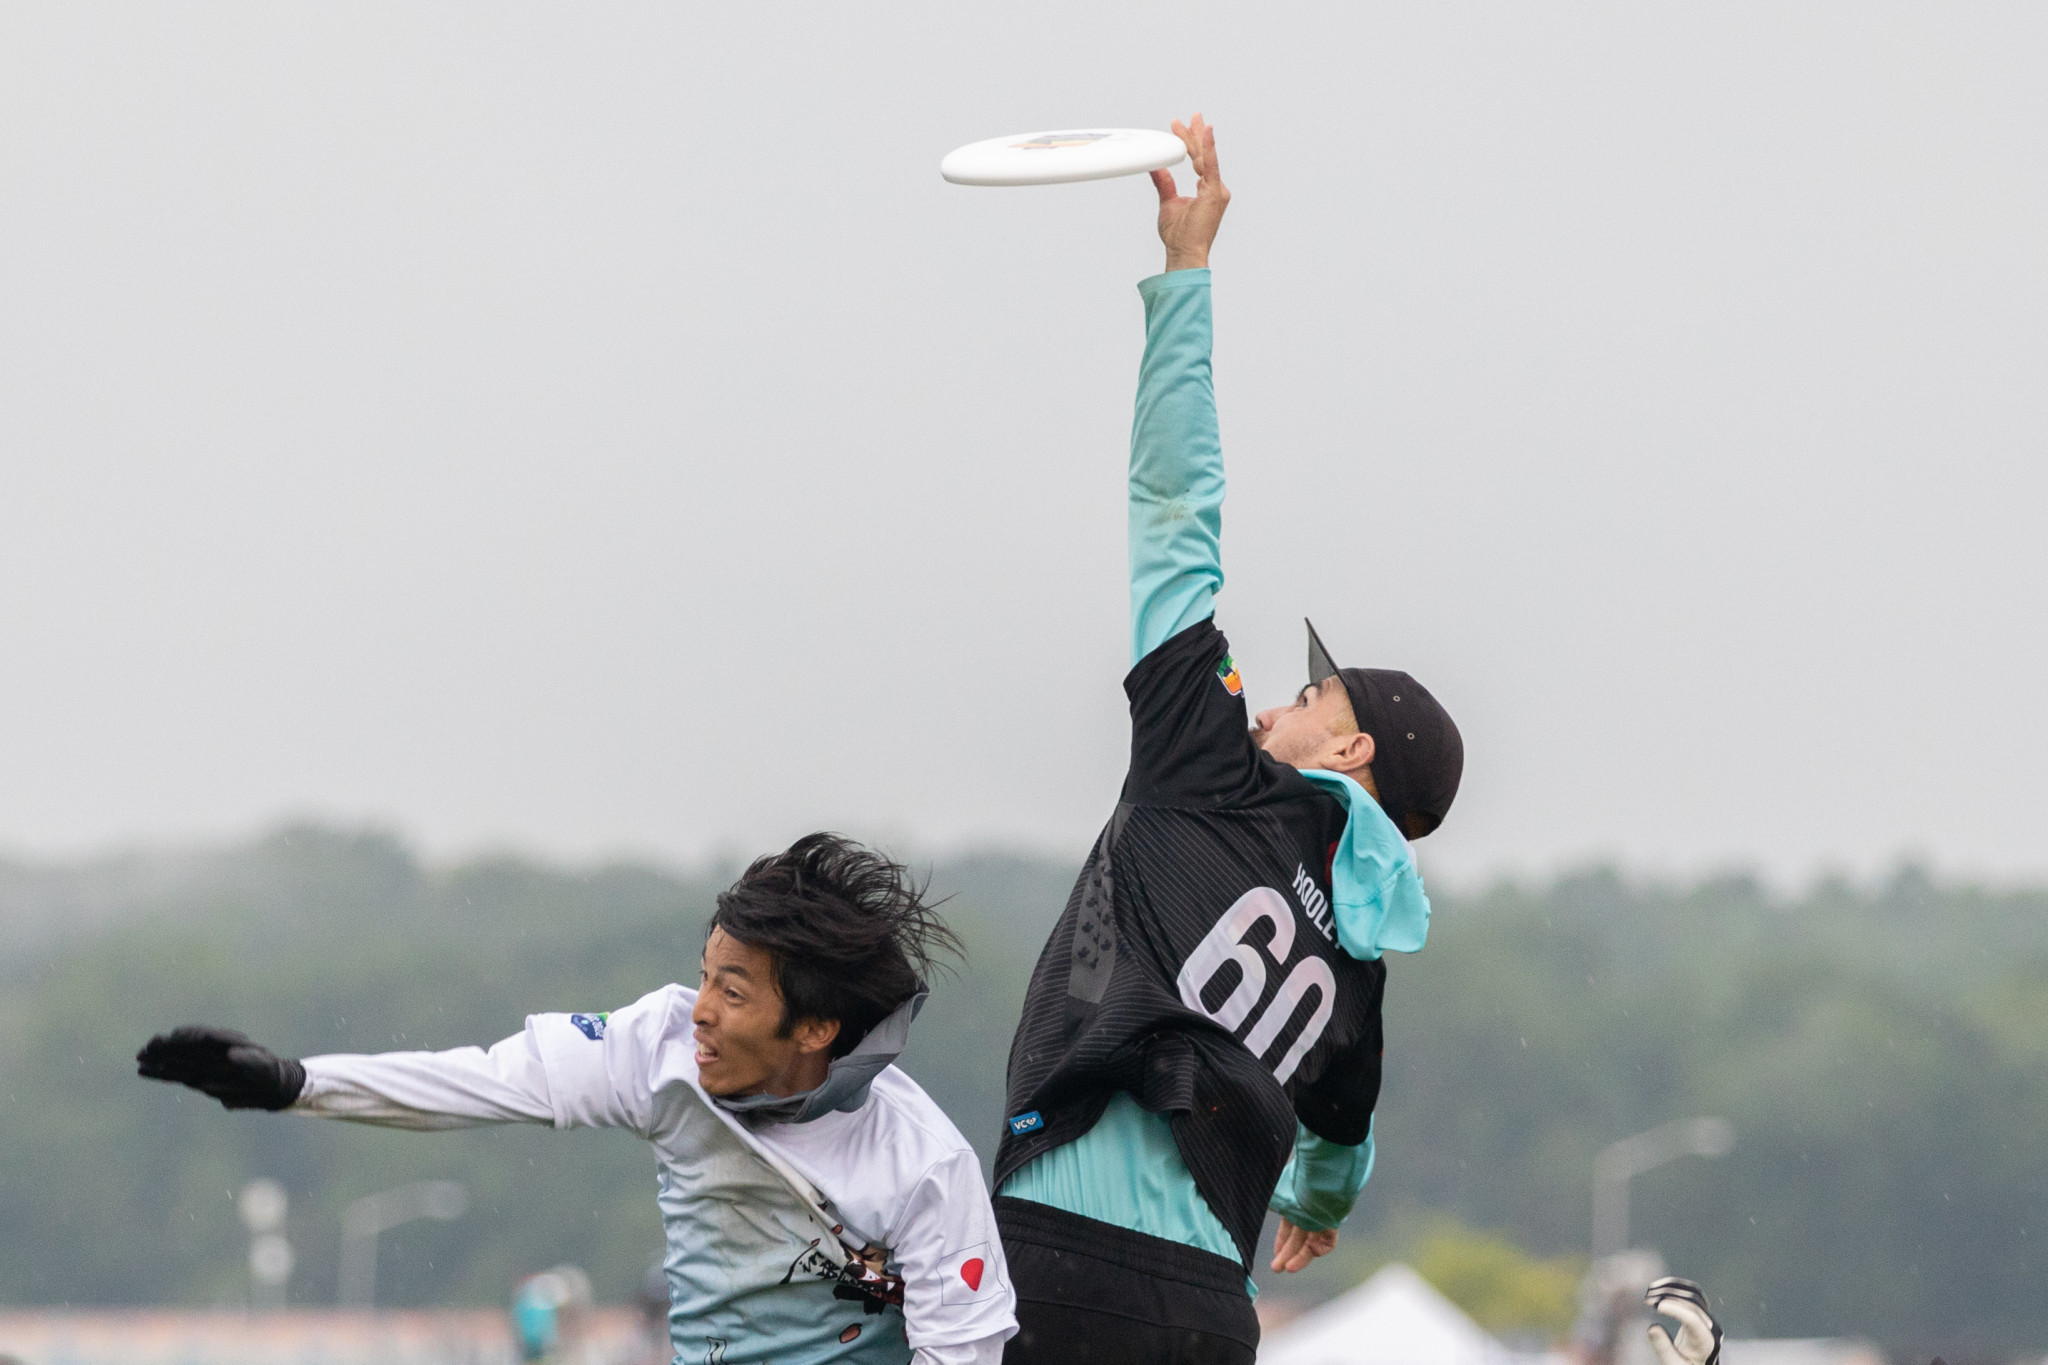 Paul Hooley scored for LAB in their win over CRAZY ©Marshall Lian for UltiPhotos